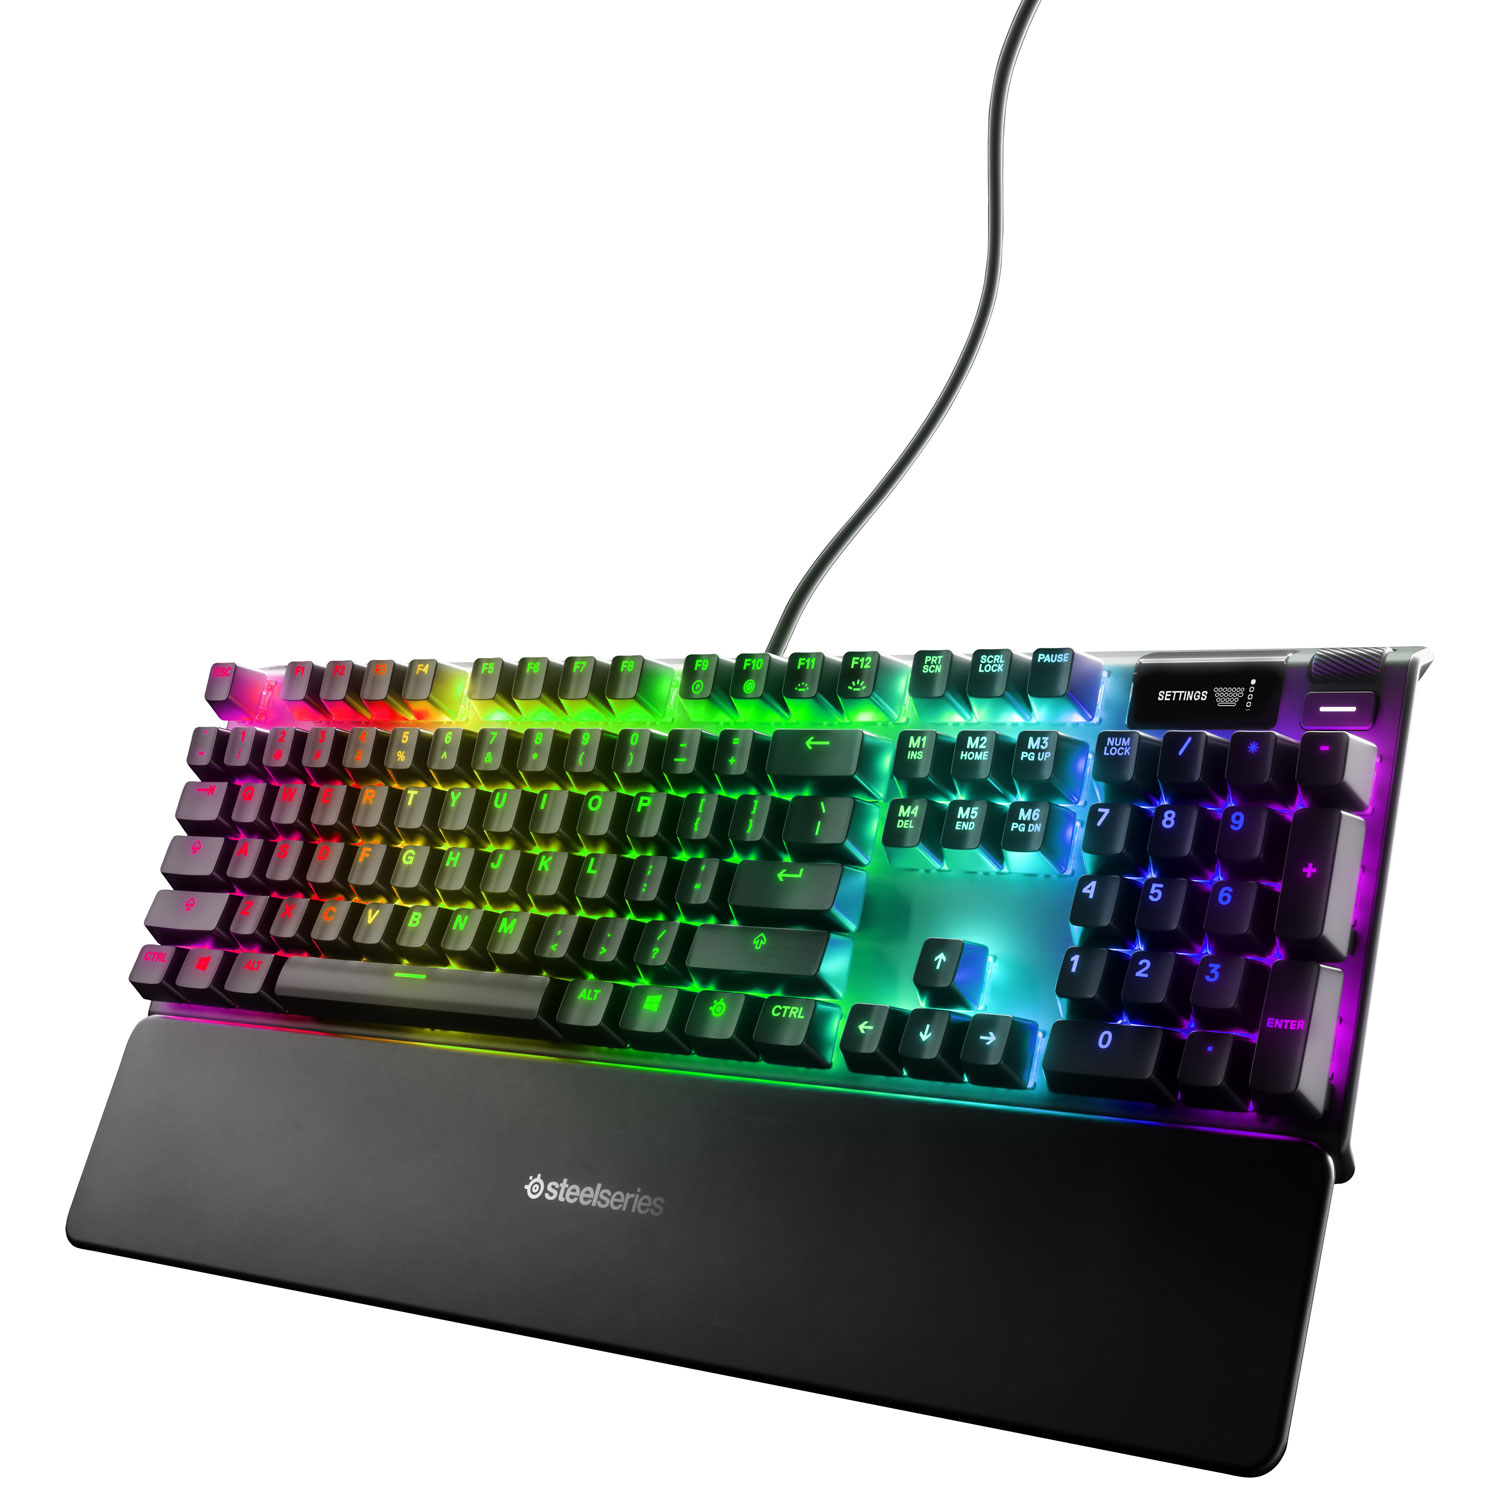 SteelSeries Apex Pro gaming keyboard review: Close to perfect - Dexerto